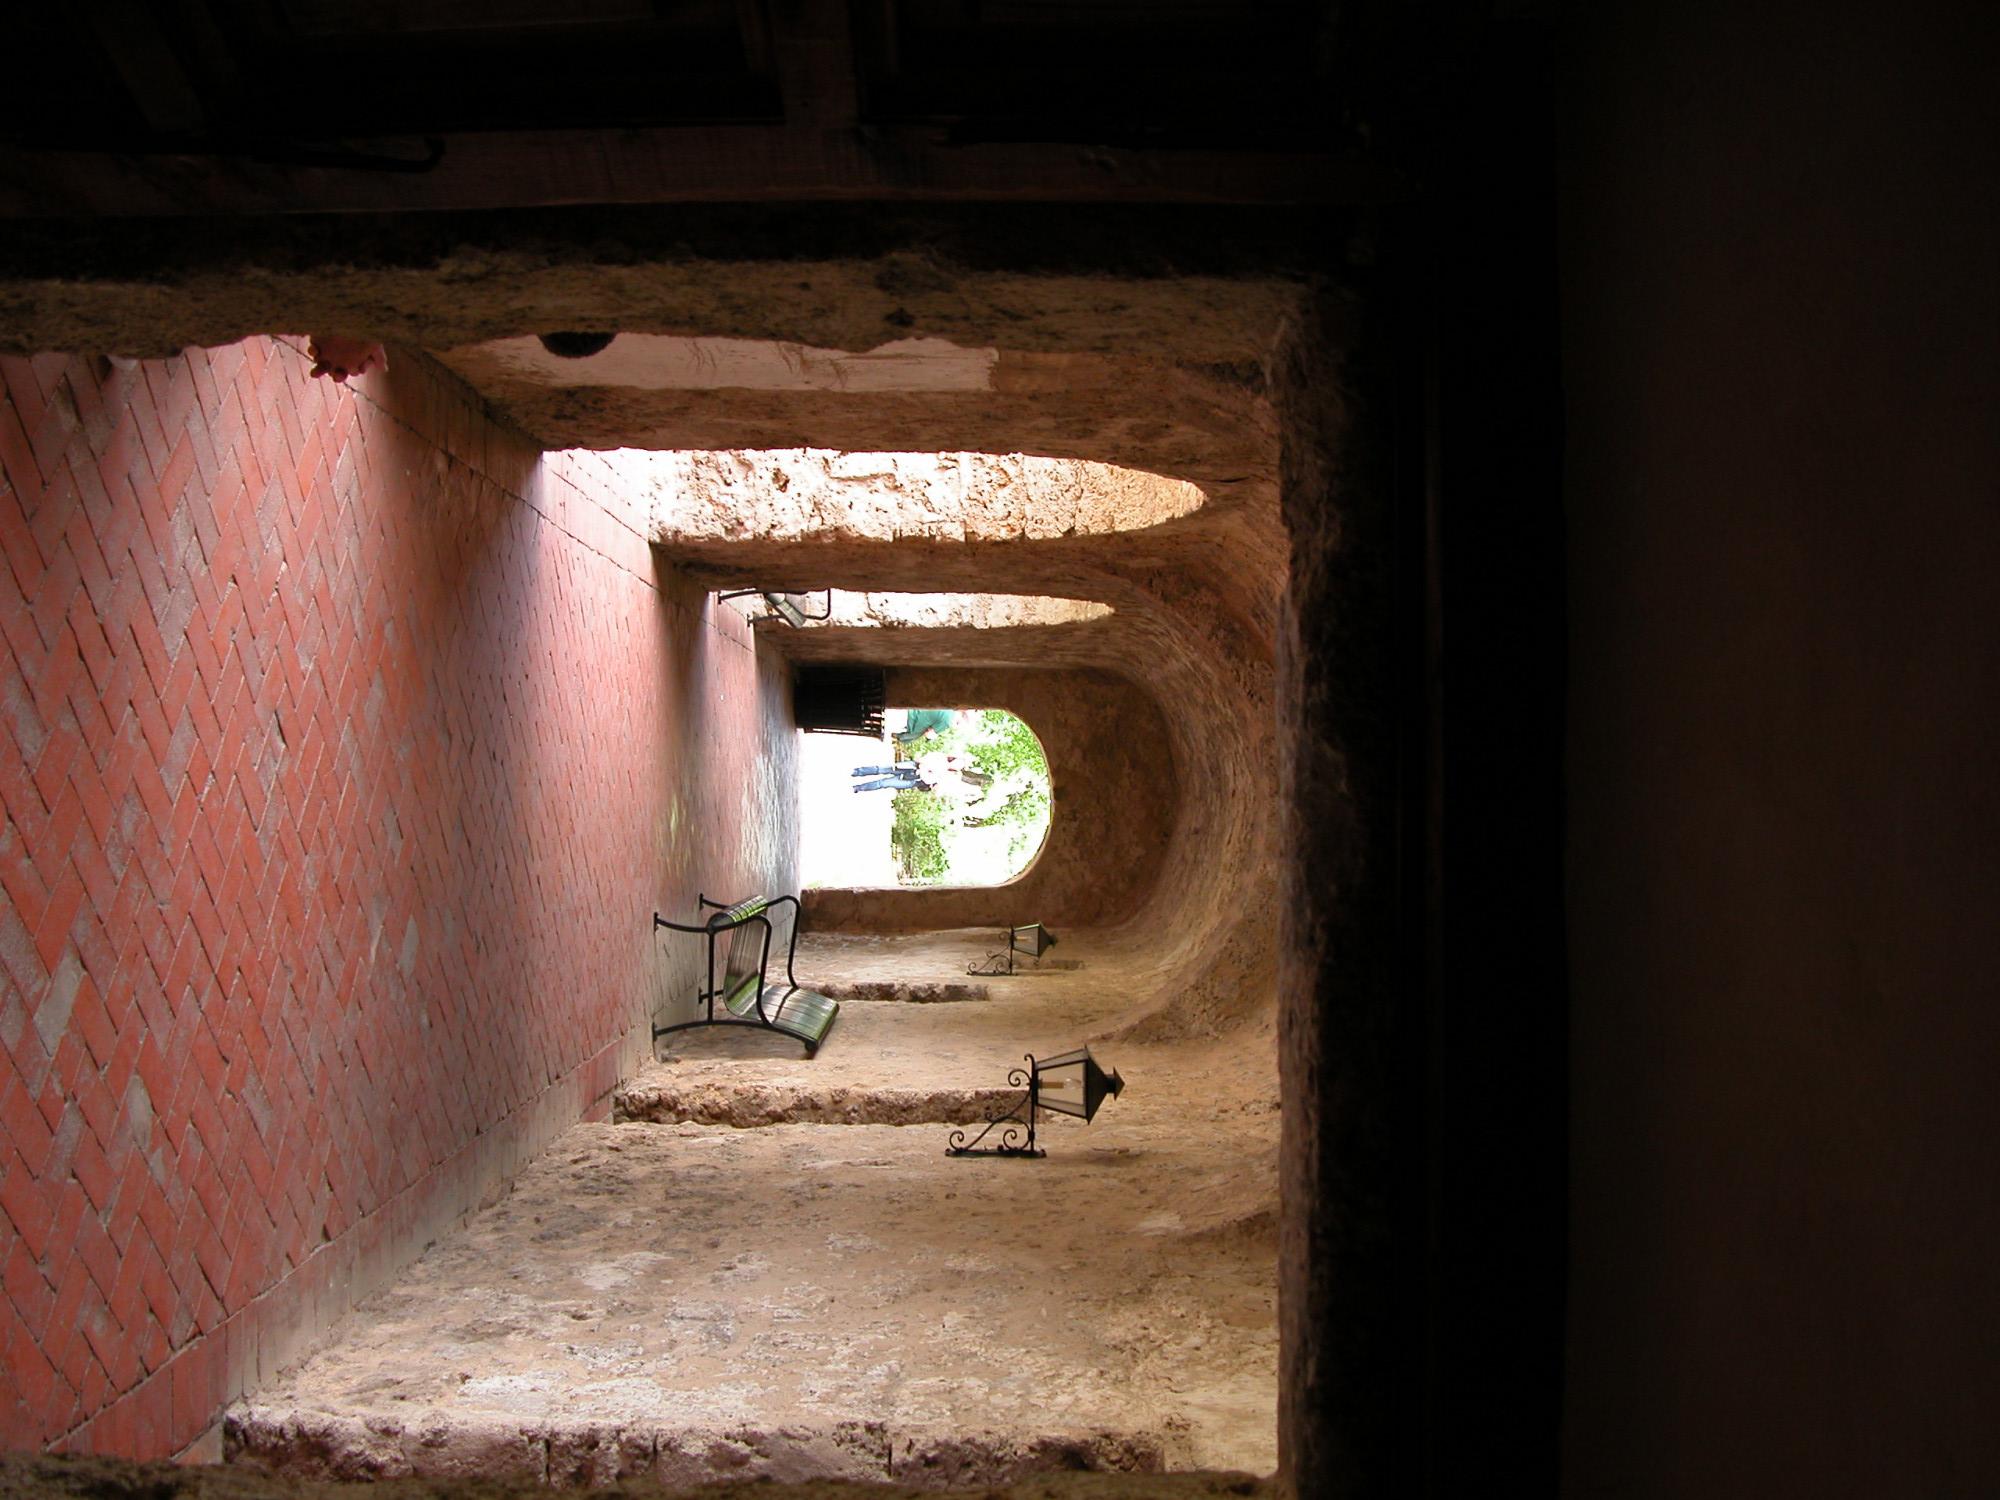 Arched walkway at Mission Concepción
                                                
                                                    [Sequence #]: 1 of 1
                                                